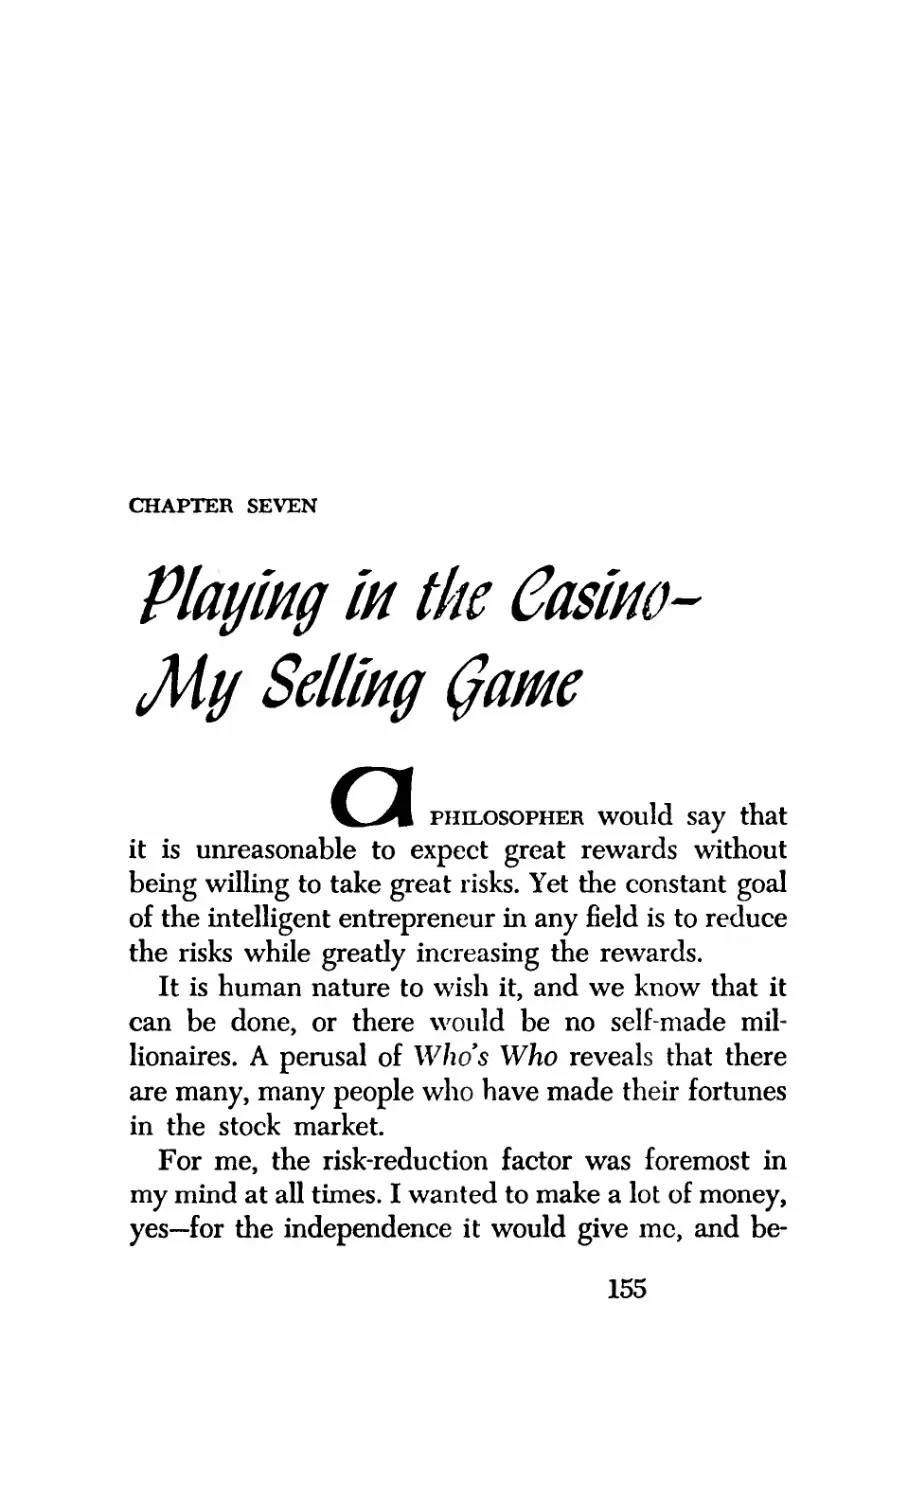 7. Playing in the Casino—My Selling Game